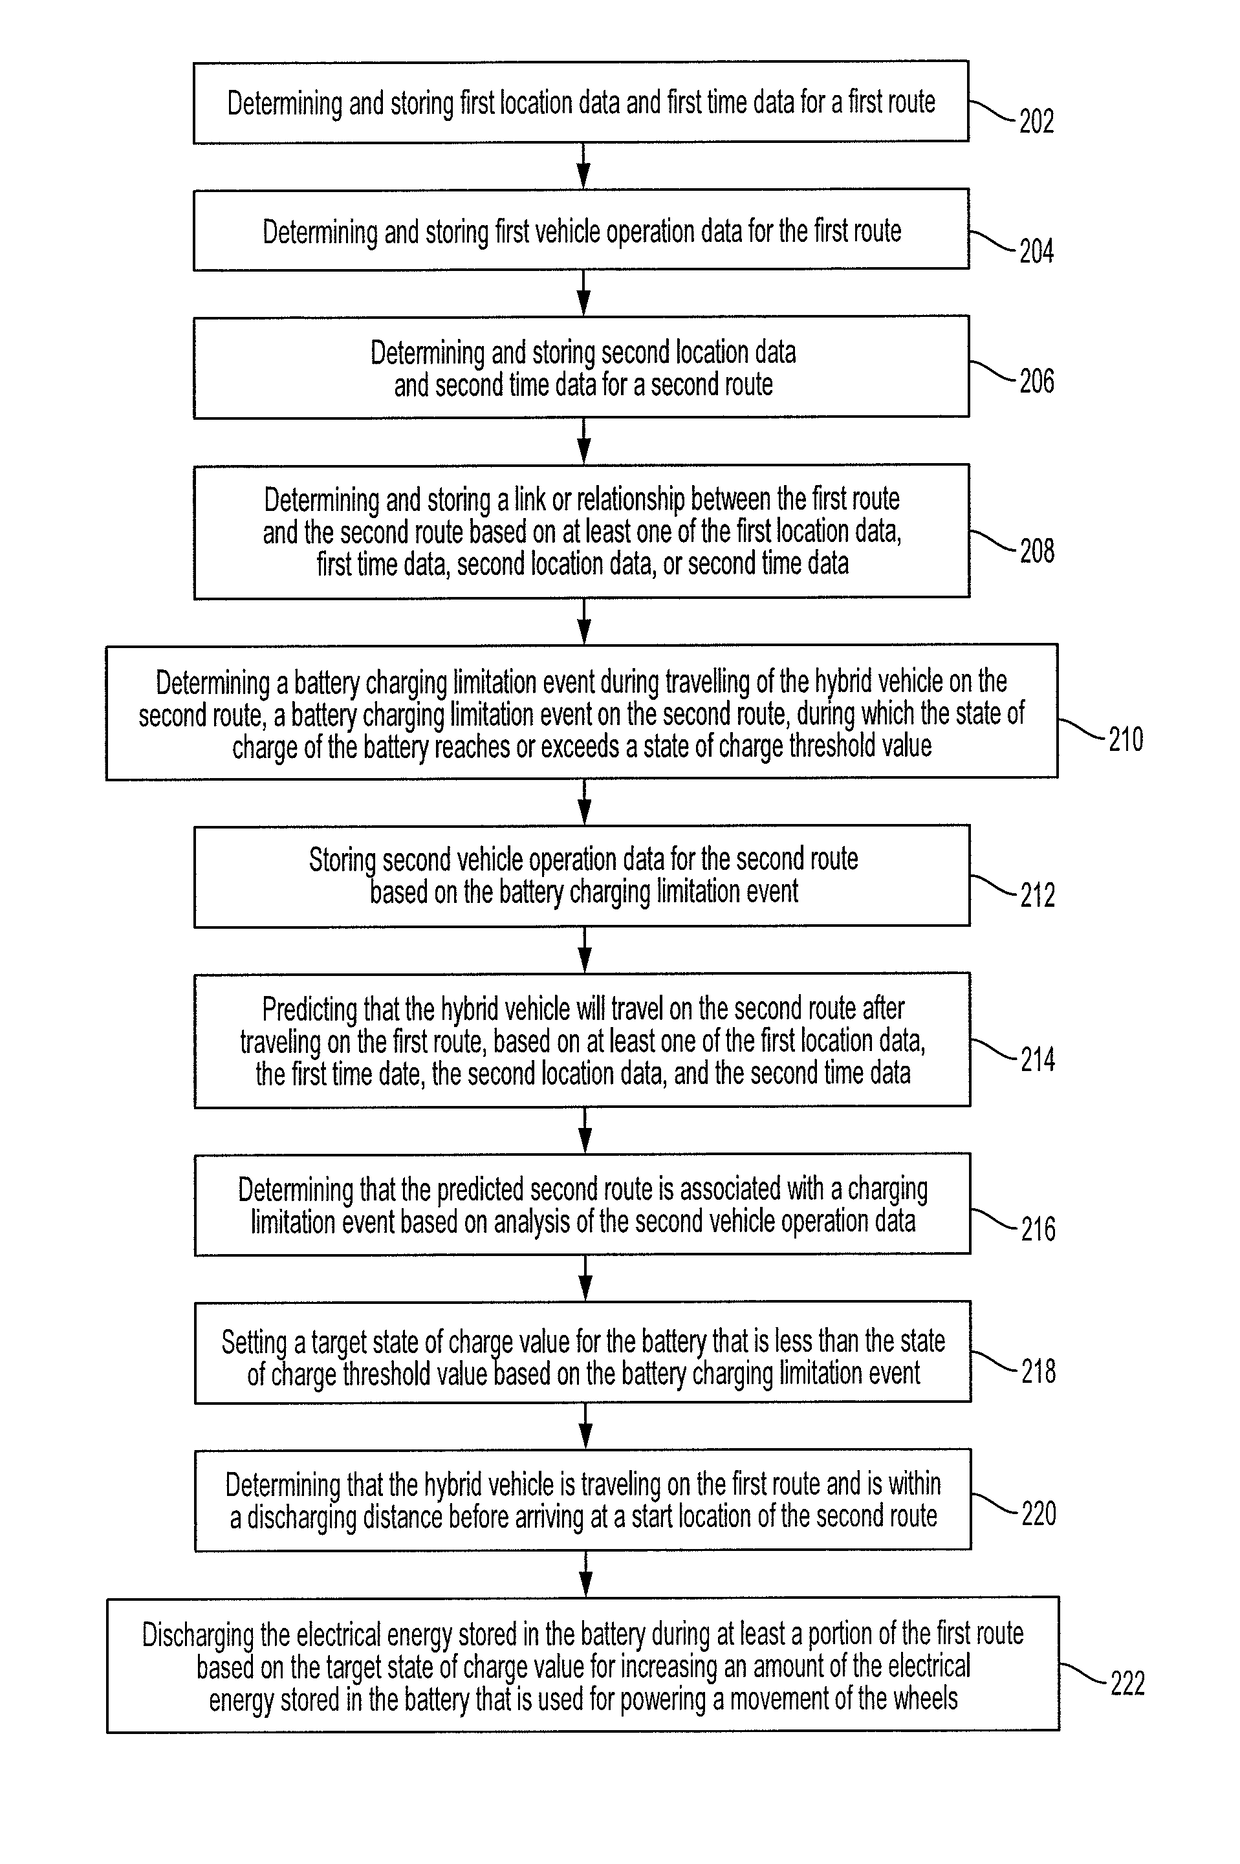 Systems and methods for improving energy efficiency of a vehicle based on route prediction